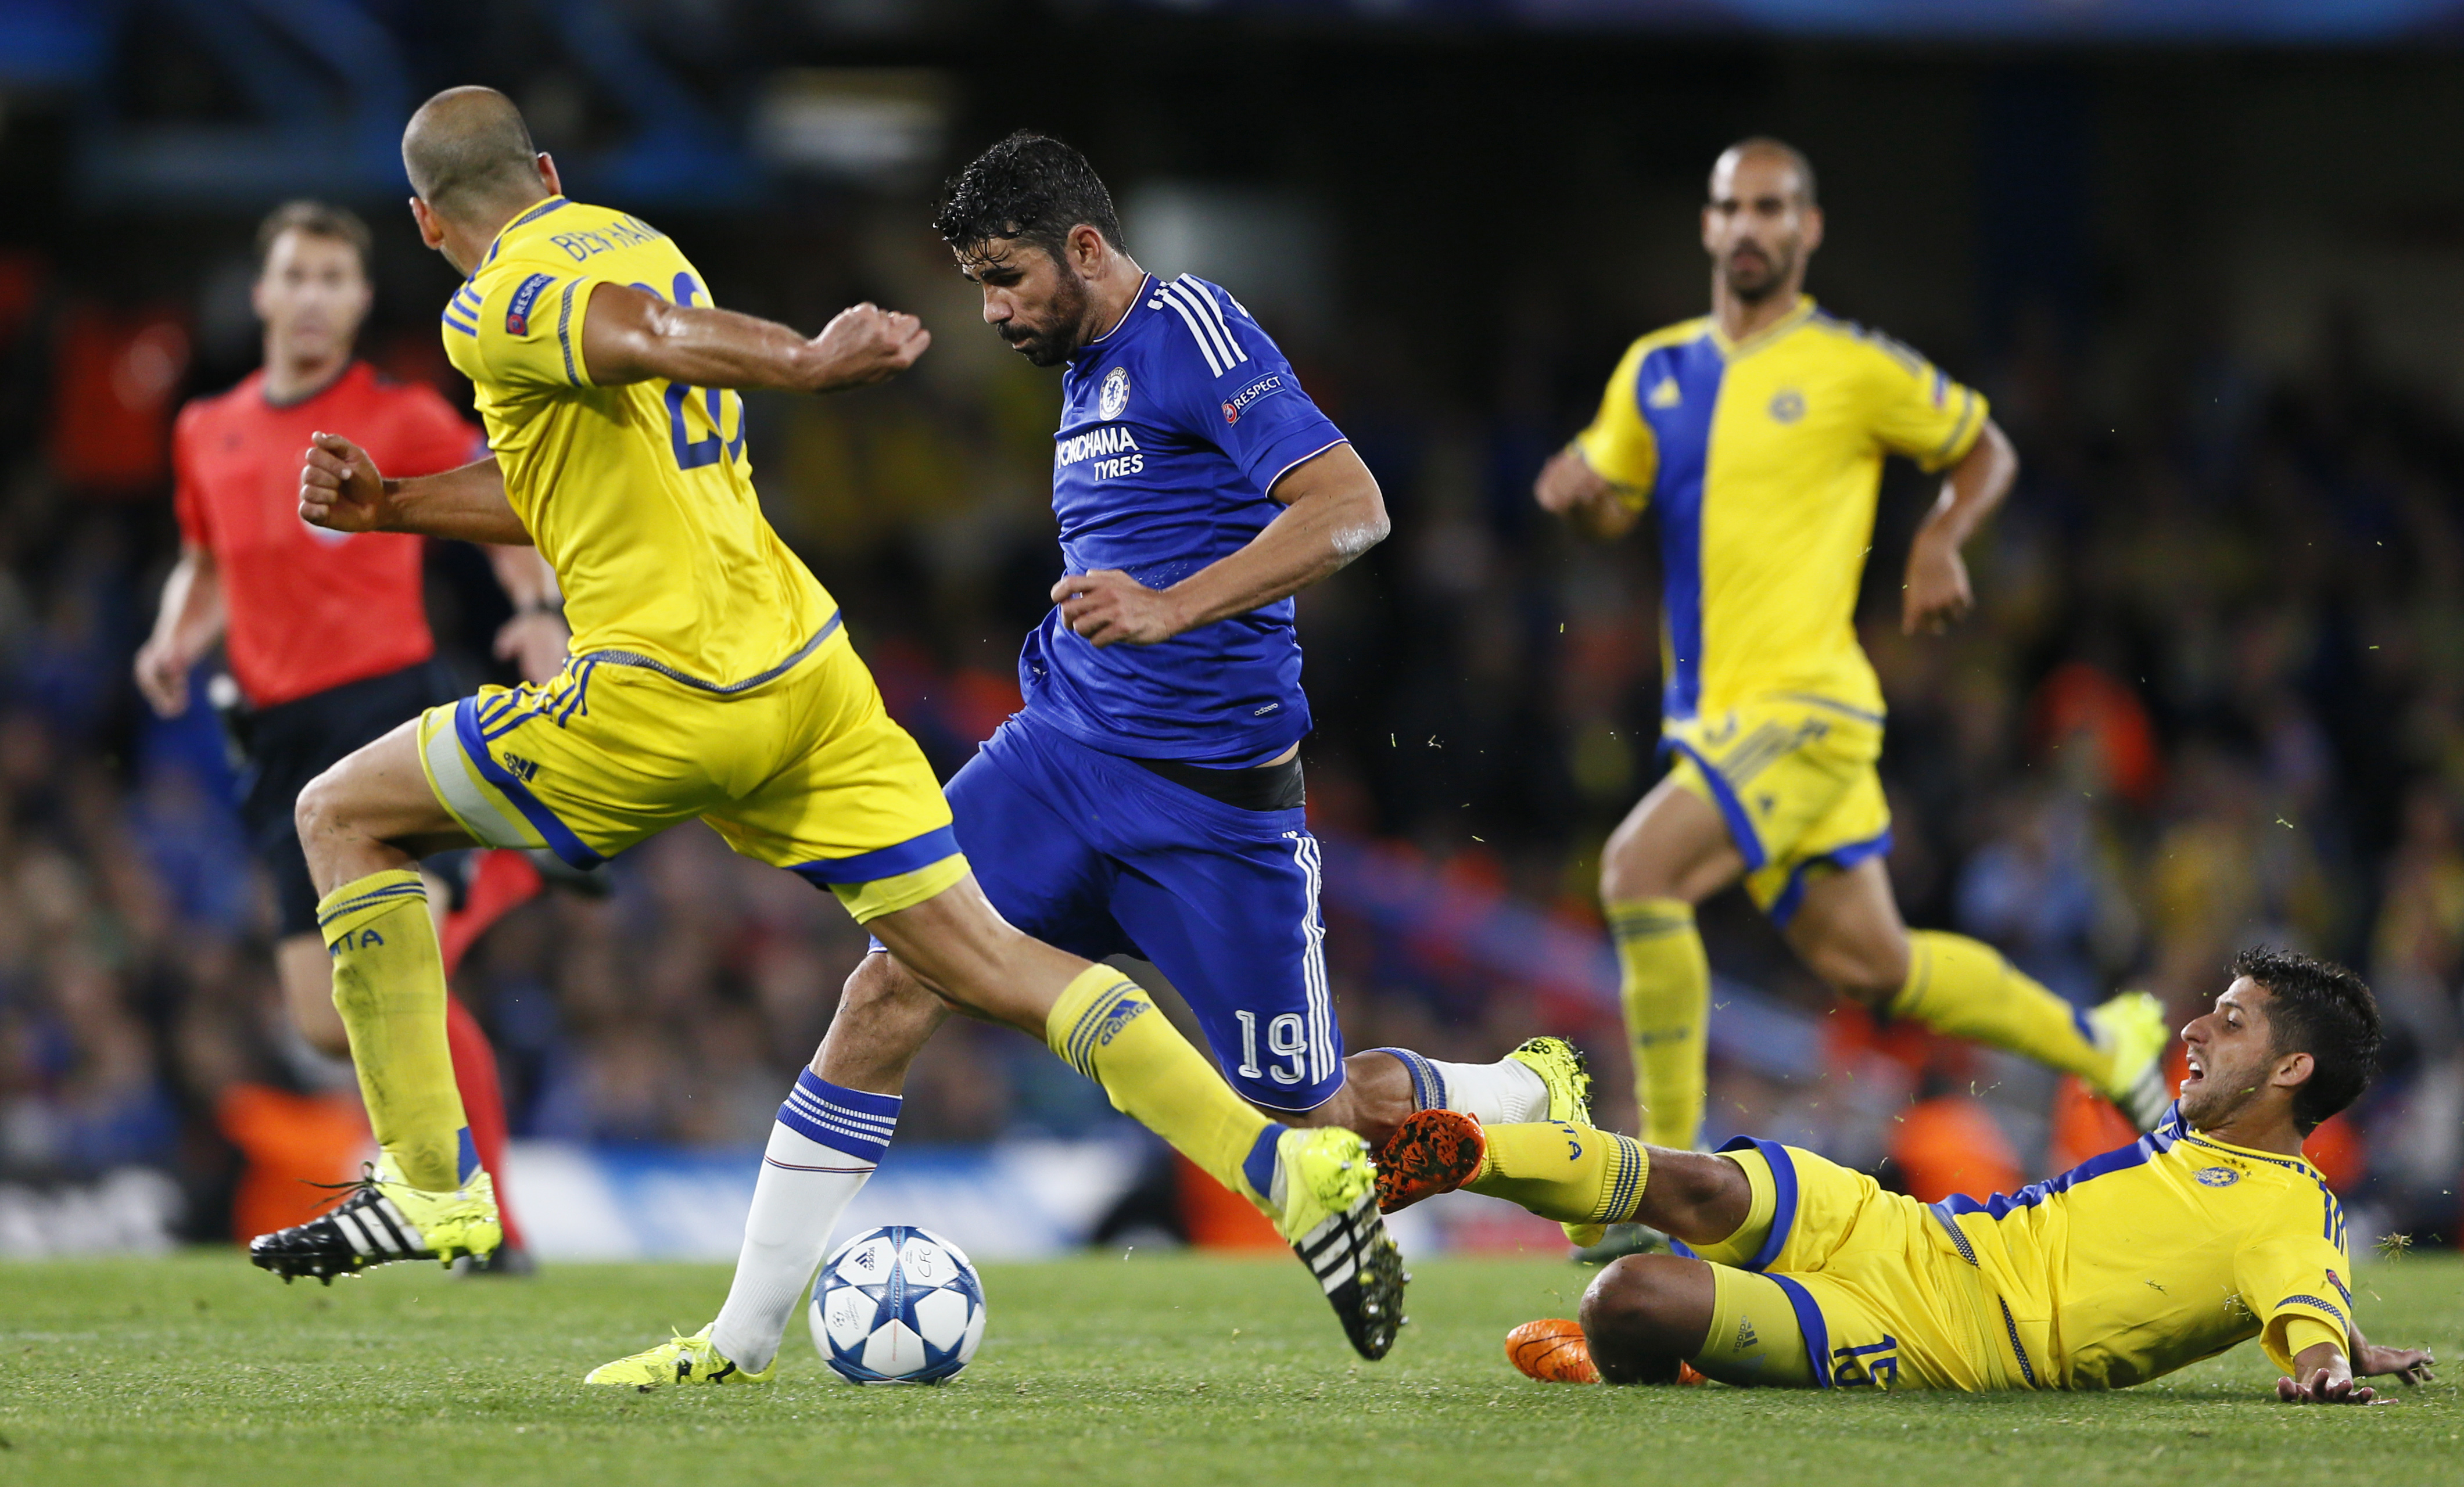 Football - Chelsea v Maccabi Tel-Aviv - UEFA Champions League Group Stage - Group G - Stamford Bridge, London, England - 16/9/15nChelsea's Diego Costa in actionnReuters / Stefan WermuthnLivepicnEDITORIAL USE ONLY.